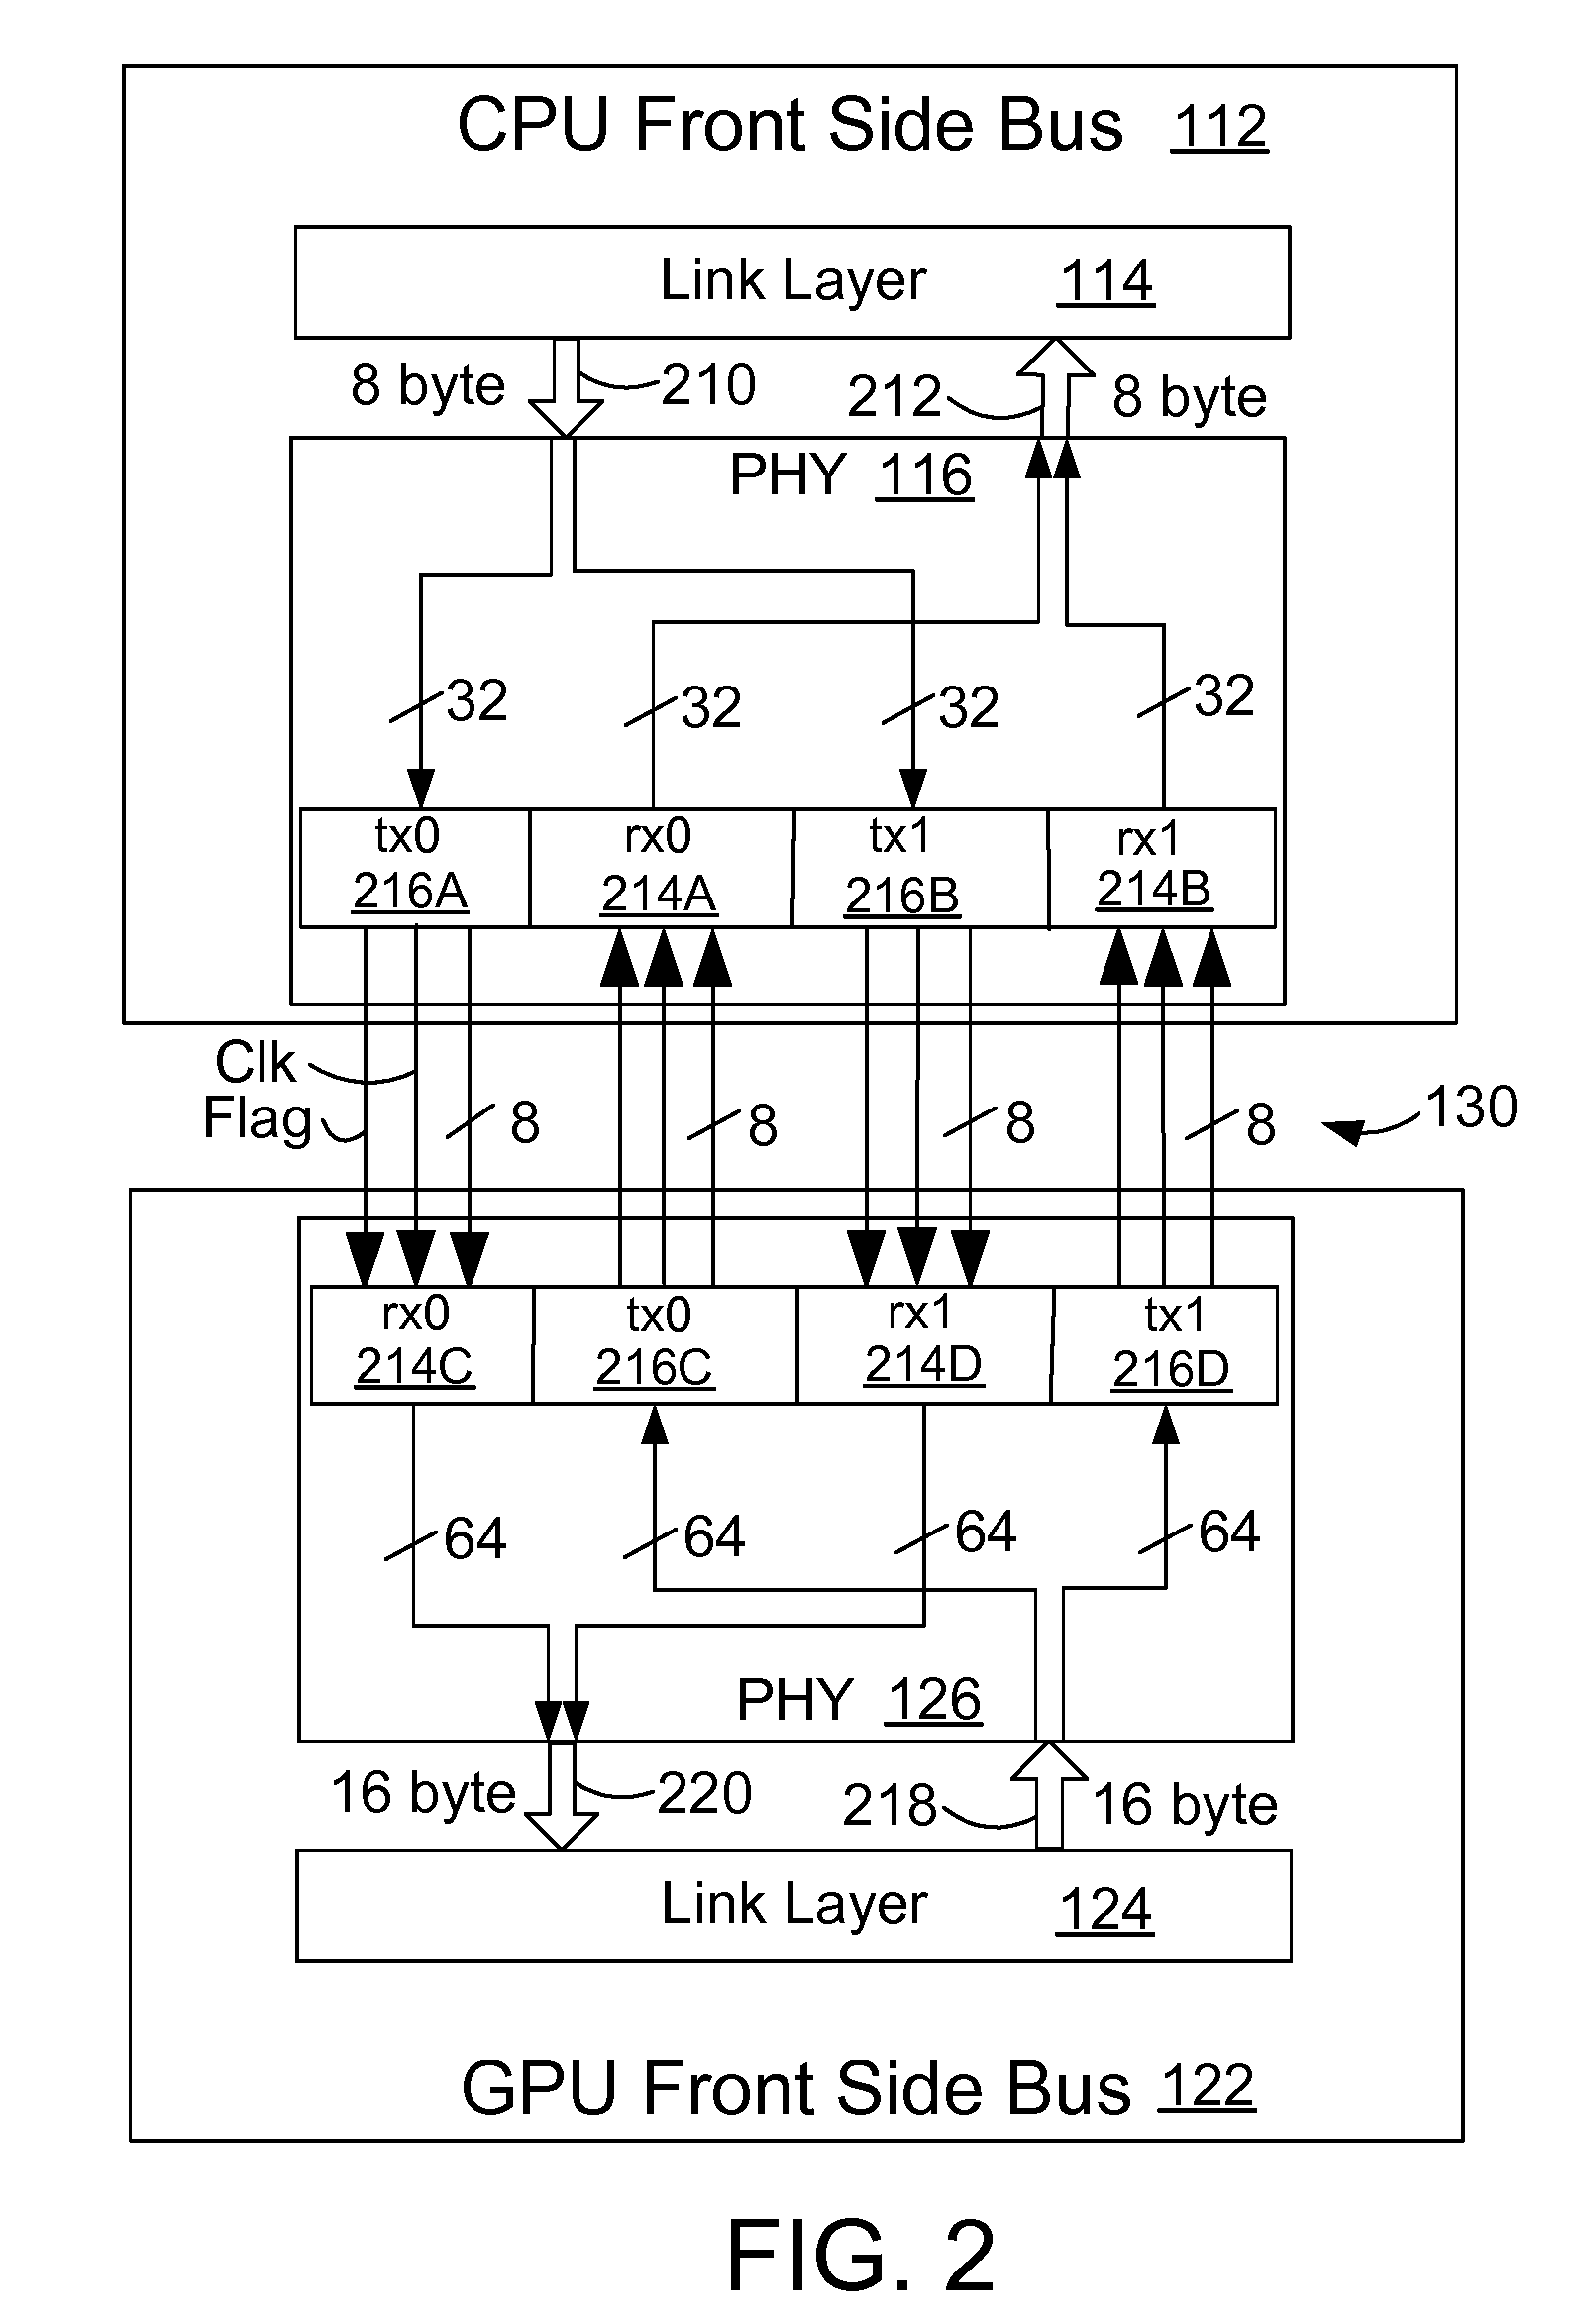 Architecture for a physical interface of a high speed front side bus